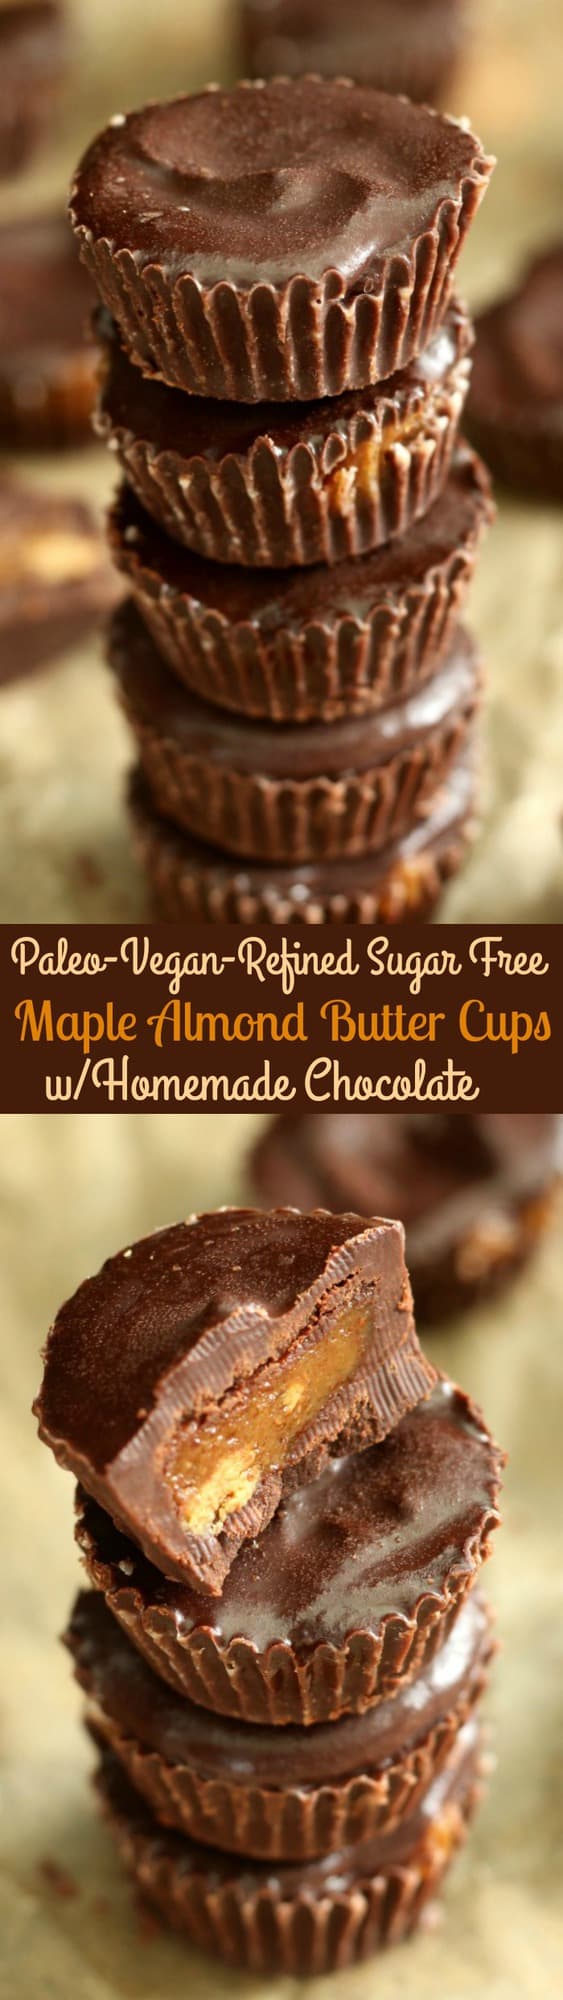 Mini maple almond butter cups with homemade coconut oil chocolate - paleo, vegan, and refined sugar free